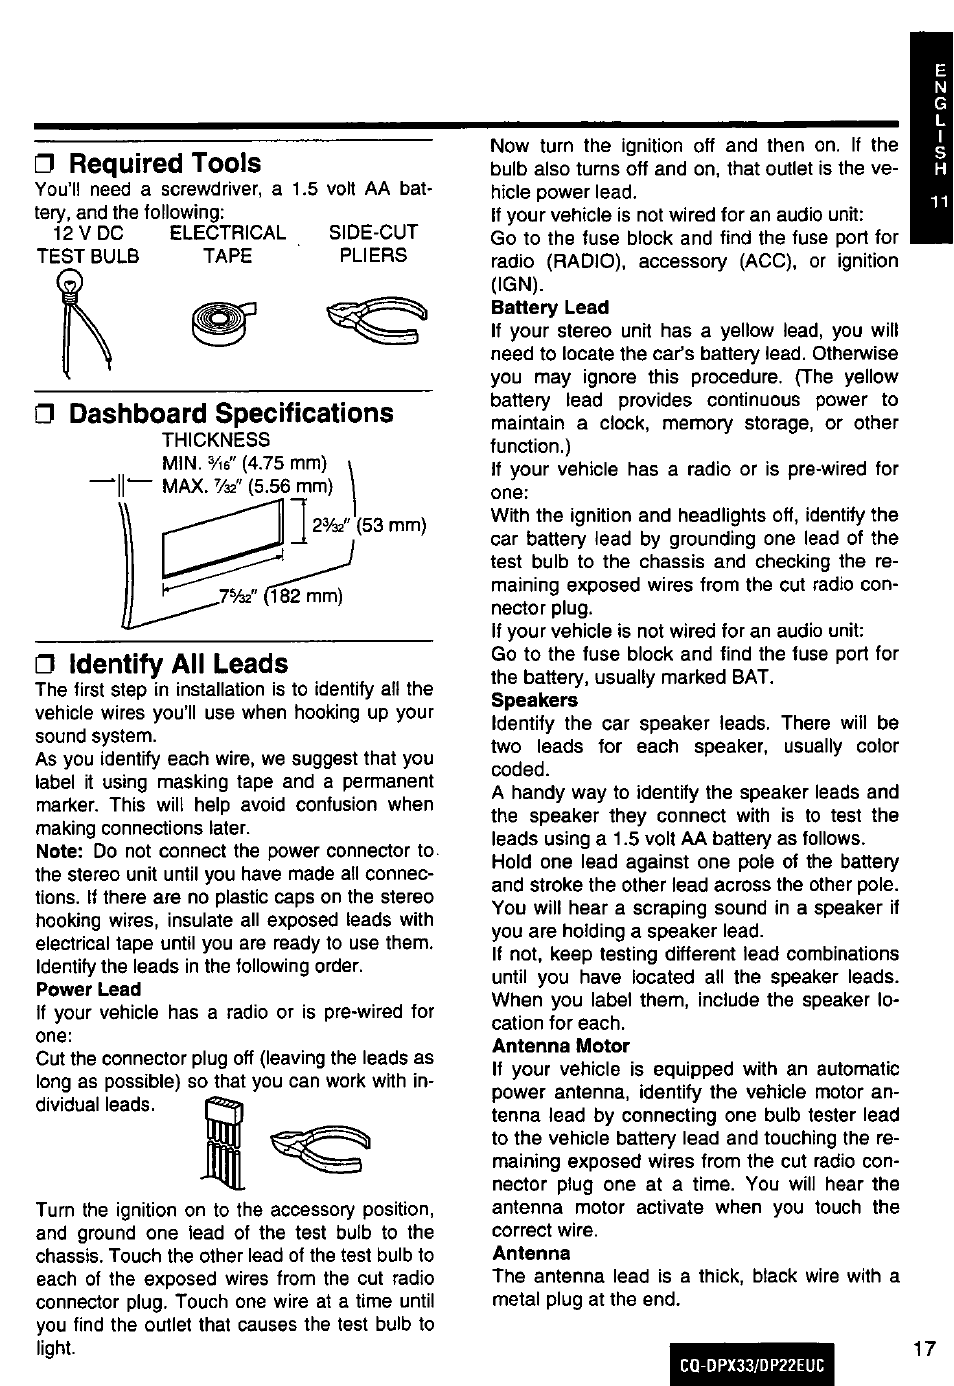 Required tools, Dashboard specifications | Panasonic CQ-DPX33 DP22EUC Manuel d'utilisation | Page 17 / 48